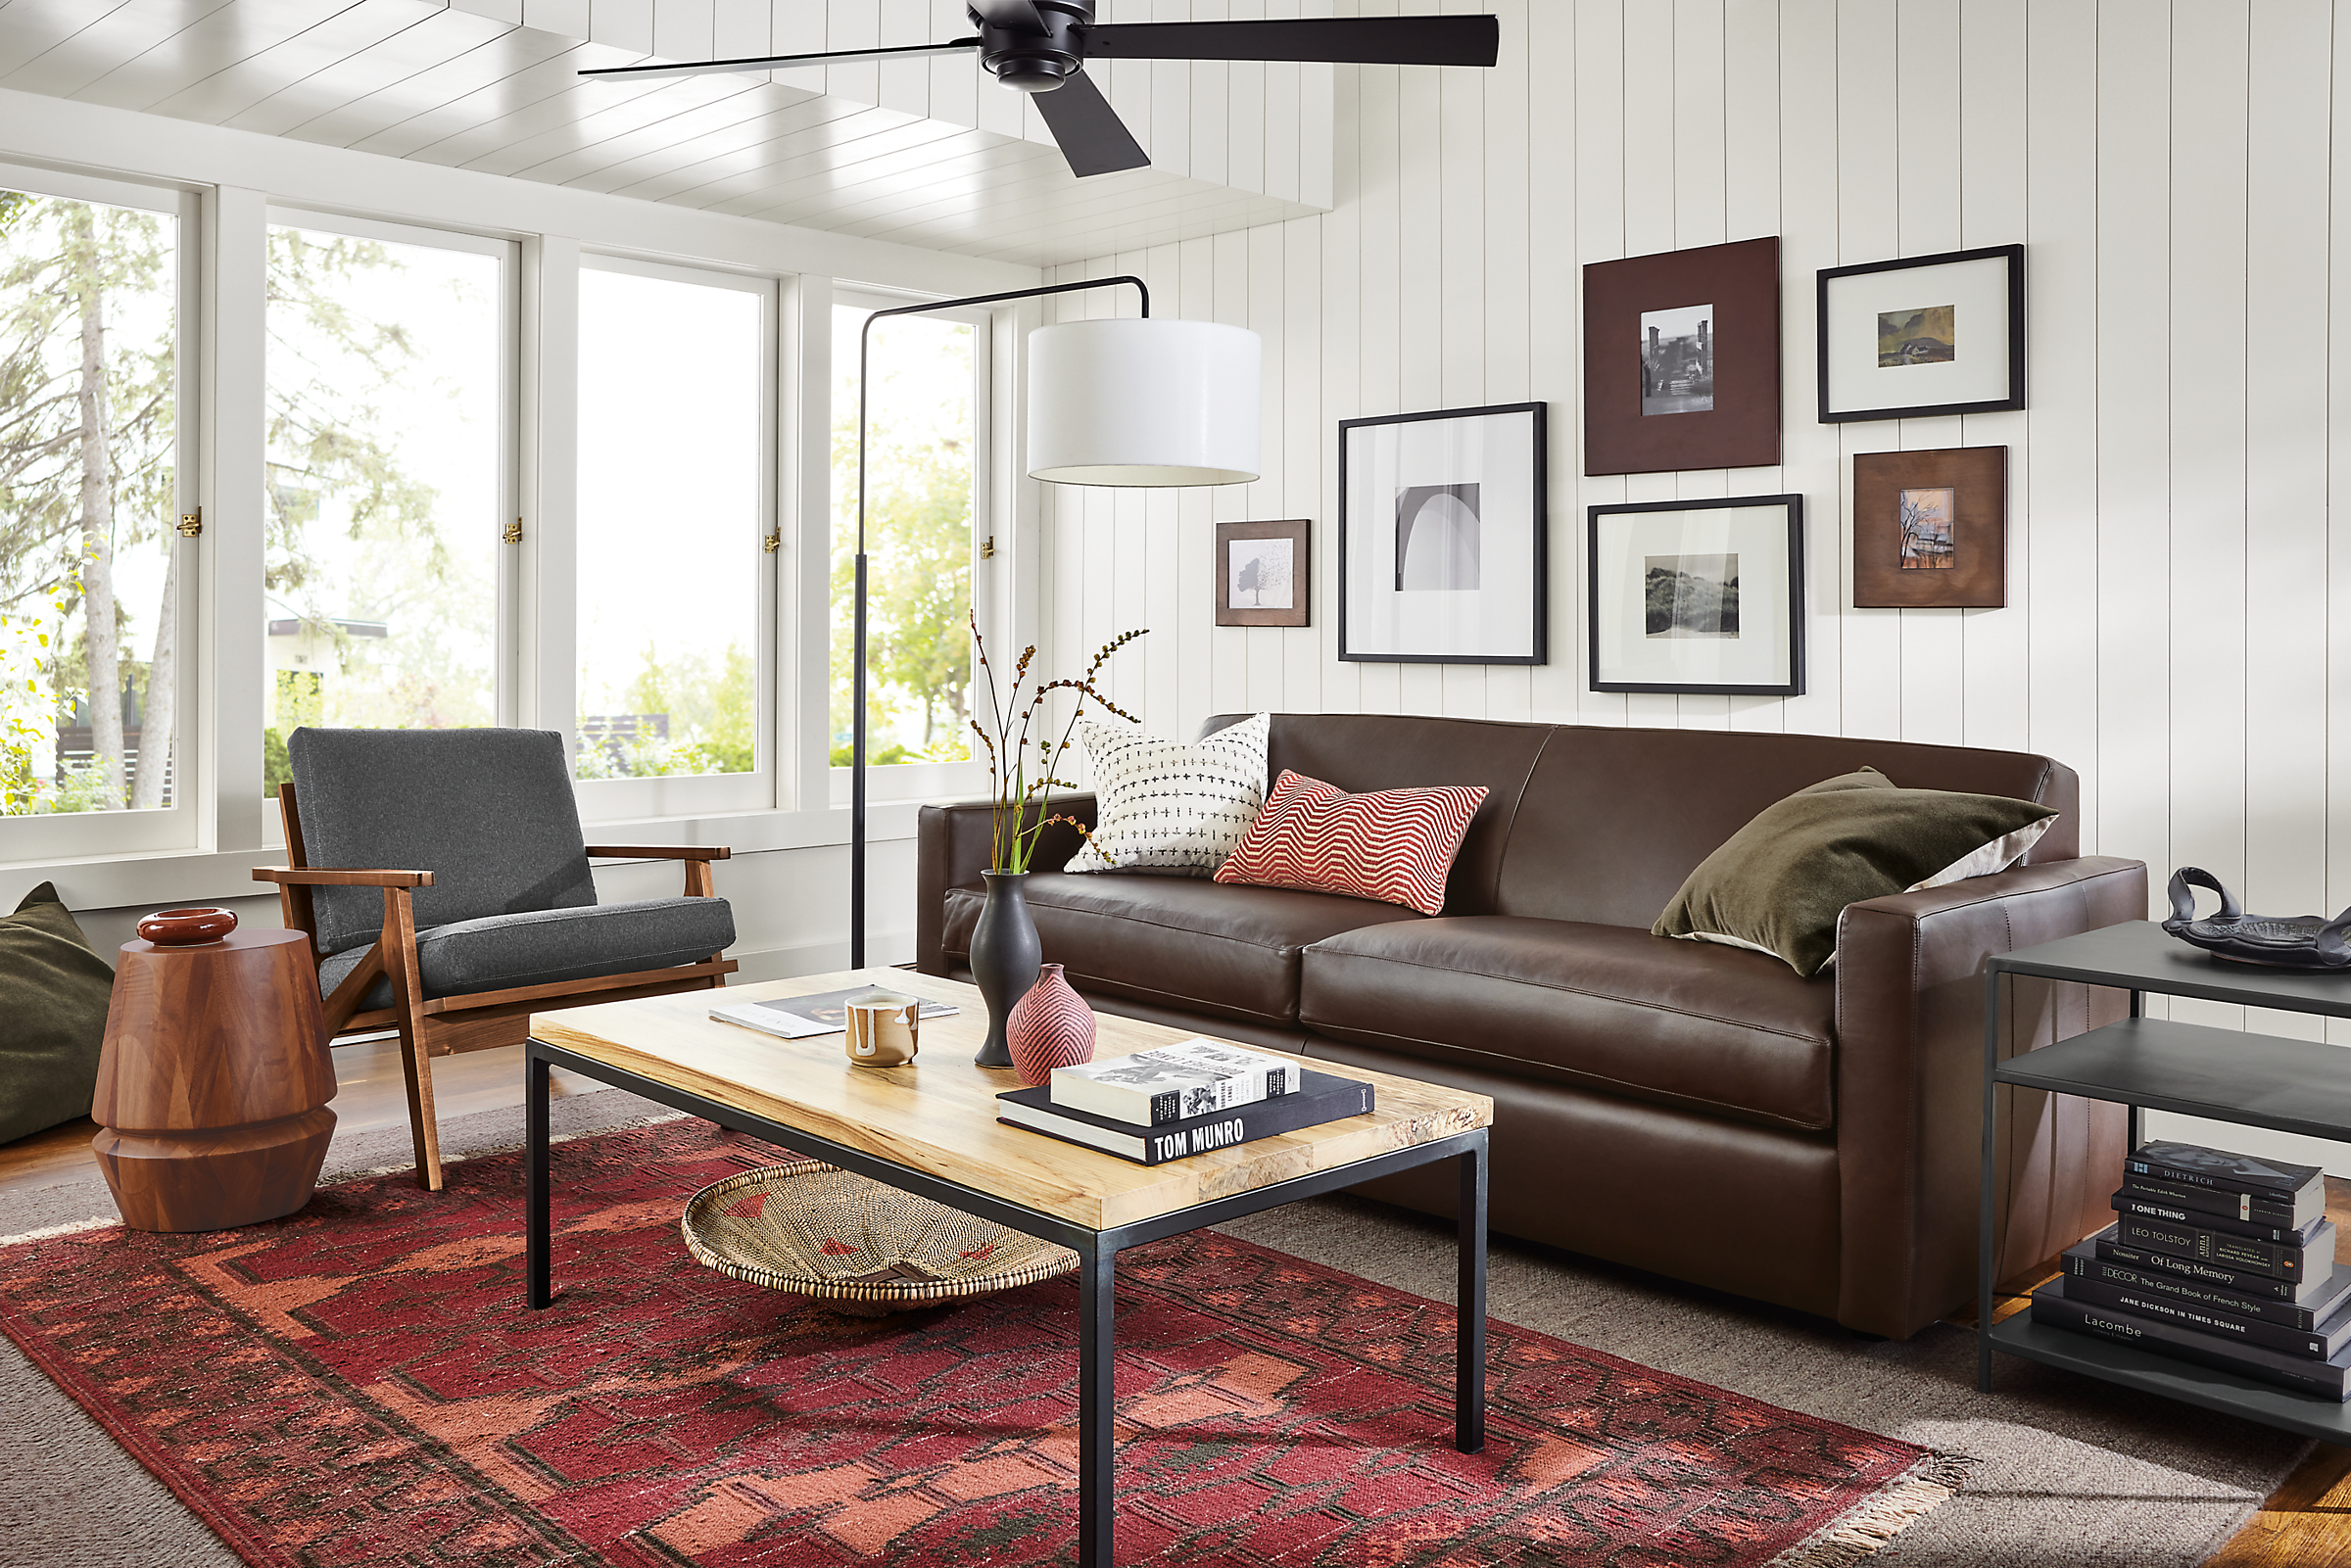 Living room with 84 wide Alex sofa in Laino Coffee leather, Sanna chair in flint charcoal and Tamsa 5 by 8 rug in rust.